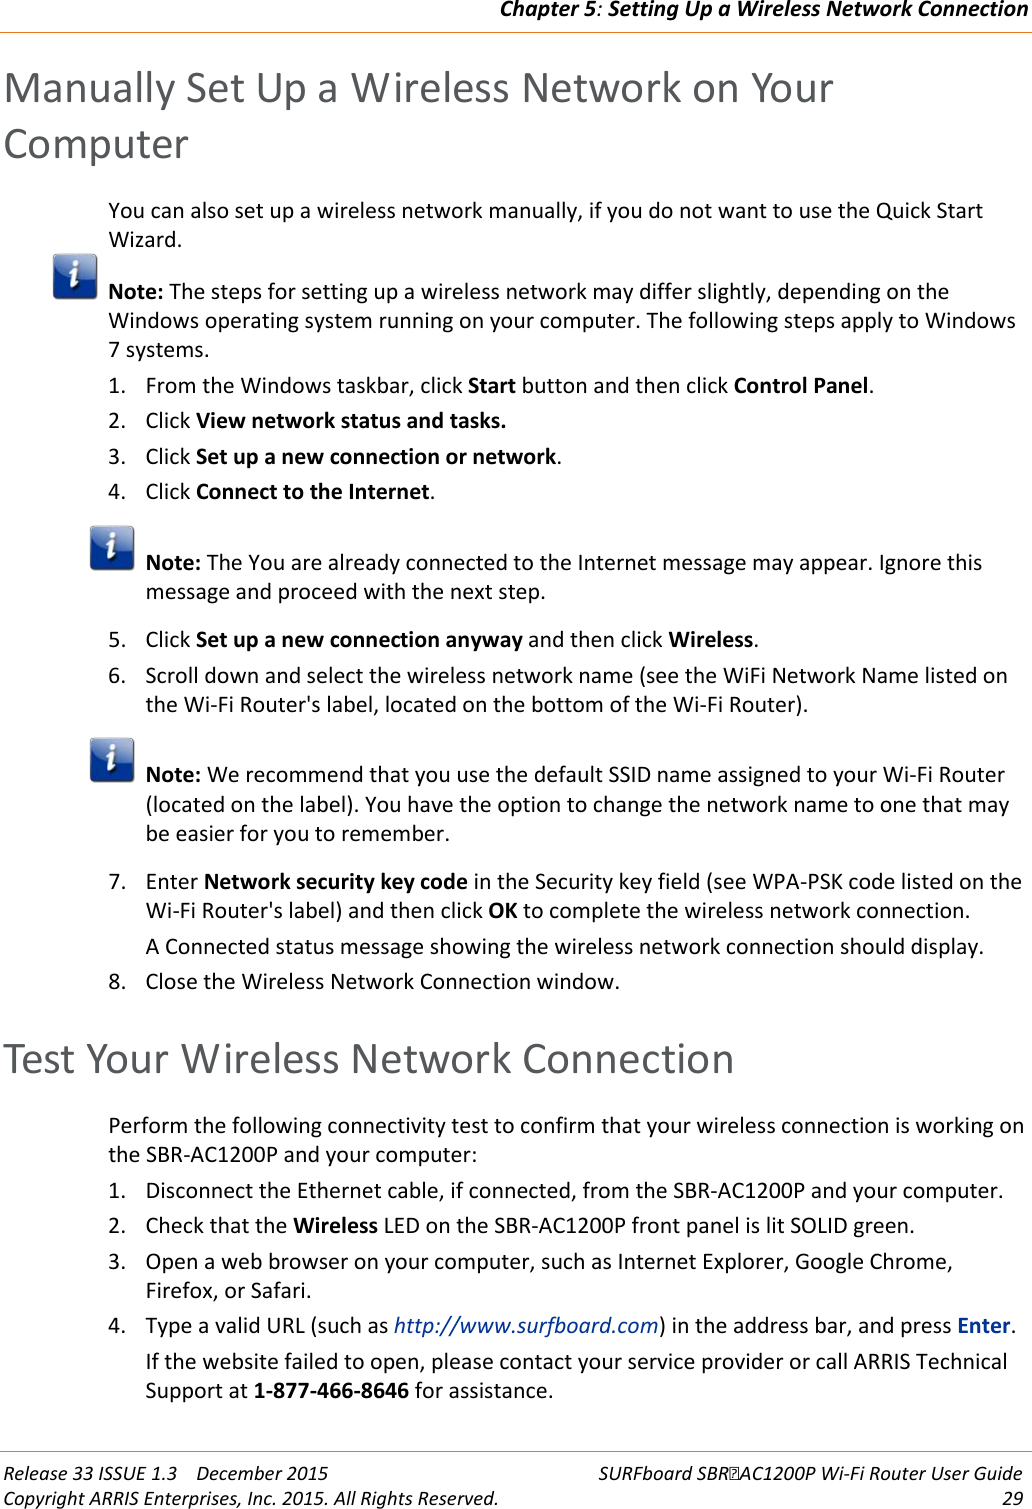 Chapter 5: Setting Up a Wireless Network Connection  Release 33 ISSUE 1.3    December 2015 SURFboard SBRAC1200P Wi-Fi Router User Guide Copyright ARRIS Enterprises, Inc. 2015. All Rights Reserved. 29  Manually Set Up a Wireless Network on Your Computer You can also set up a wireless network manually, if you do not want to use the Quick Start Wizard.  Note: The steps for setting up a wireless network may differ slightly, depending on the Windows operating system running on your computer. The following steps apply to Windows 7 systems. 1. From the Windows taskbar, click Start button and then click Control Panel. 2. Click View network status and tasks. 3. Click Set up a new connection or network. 4. Click Connect to the Internet.  Note: The You are already connected to the Internet message may appear. Ignore this message and proceed with the next step. 5. Click Set up a new connection anyway and then click Wireless. 6. Scroll down and select the wireless network name (see the WiFi Network Name listed on the Wi-Fi Router&apos;s label, located on the bottom of the Wi-Fi Router).  Note: We recommend that you use the default SSID name assigned to your Wi-Fi Router (located on the label). You have the option to change the network name to one that may be easier for you to remember. 7. Enter Network security key code in the Security key field (see WPA-PSK code listed on the Wi-Fi Router&apos;s label) and then click OK to complete the wireless network connection. A Connected status message showing the wireless network connection should display. 8. Close the Wireless Network Connection window.   Test Your Wireless Network Connection Perform the following connectivity test to confirm that your wireless connection is working on the SBR-AC1200P and your computer: 1. Disconnect the Ethernet cable, if connected, from the SBR-AC1200P and your computer. 2. Check that the Wireless LED on the SBR-AC1200P front panel is lit SOLID green.  3. Open a web browser on your computer, such as Internet Explorer, Google Chrome, Firefox, or Safari. 4. Type a valid URL (such as http://www.surfboard.com) in the address bar, and press Enter. If the website failed to open, please contact your service provider or call ARRIS Technical Support at 1-877-466-8646 for assistance.  